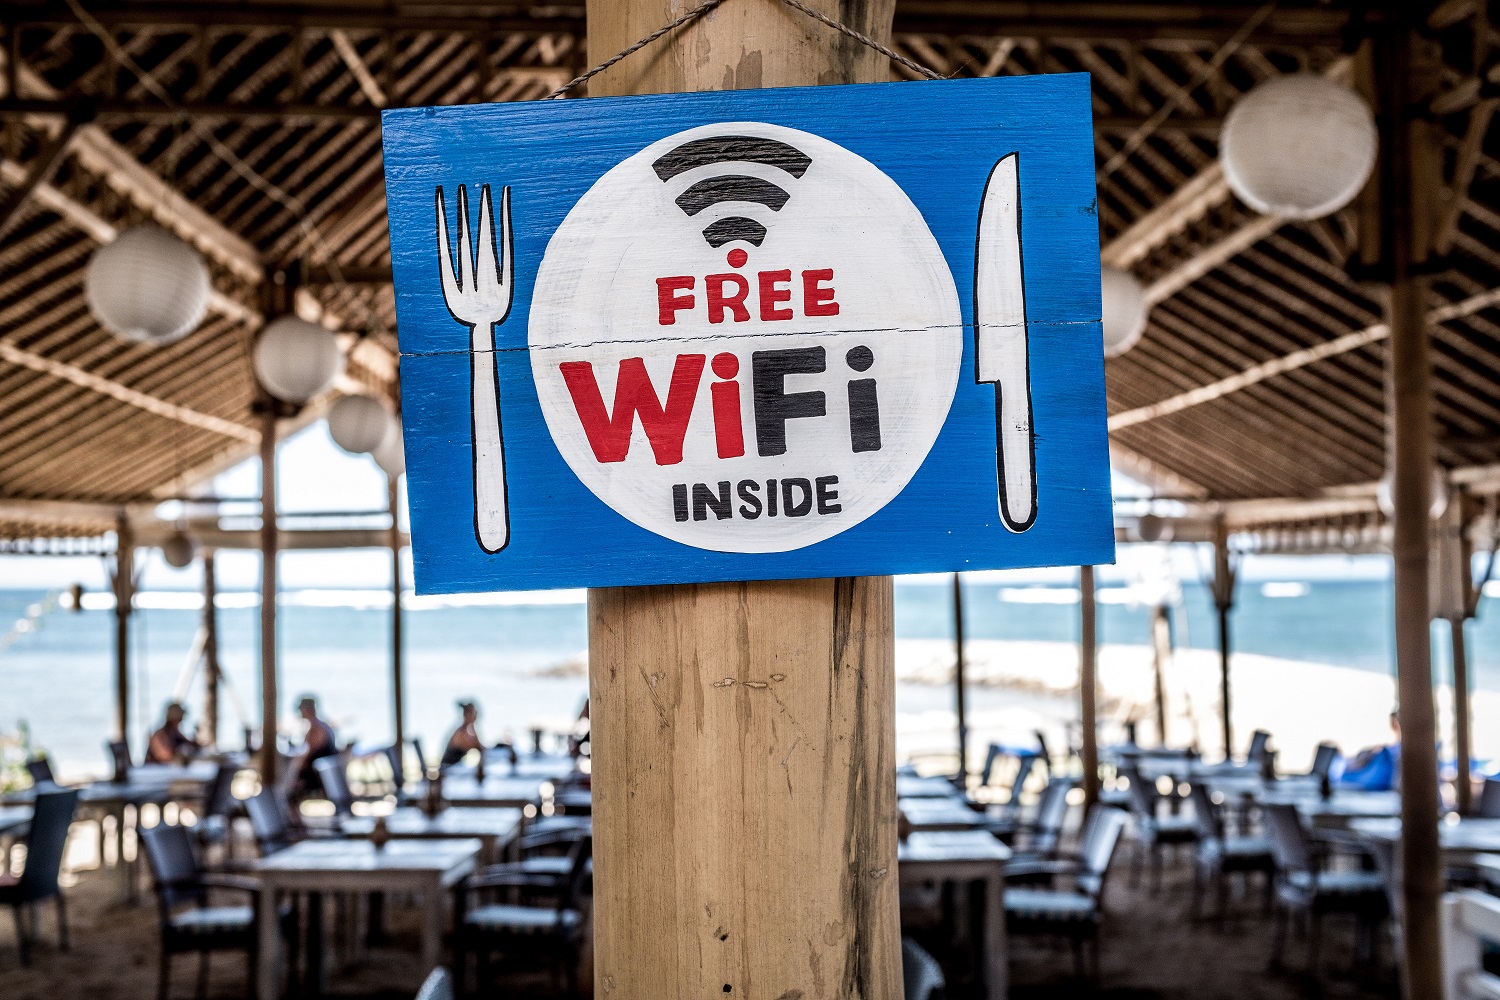 WiFi in the IoT world